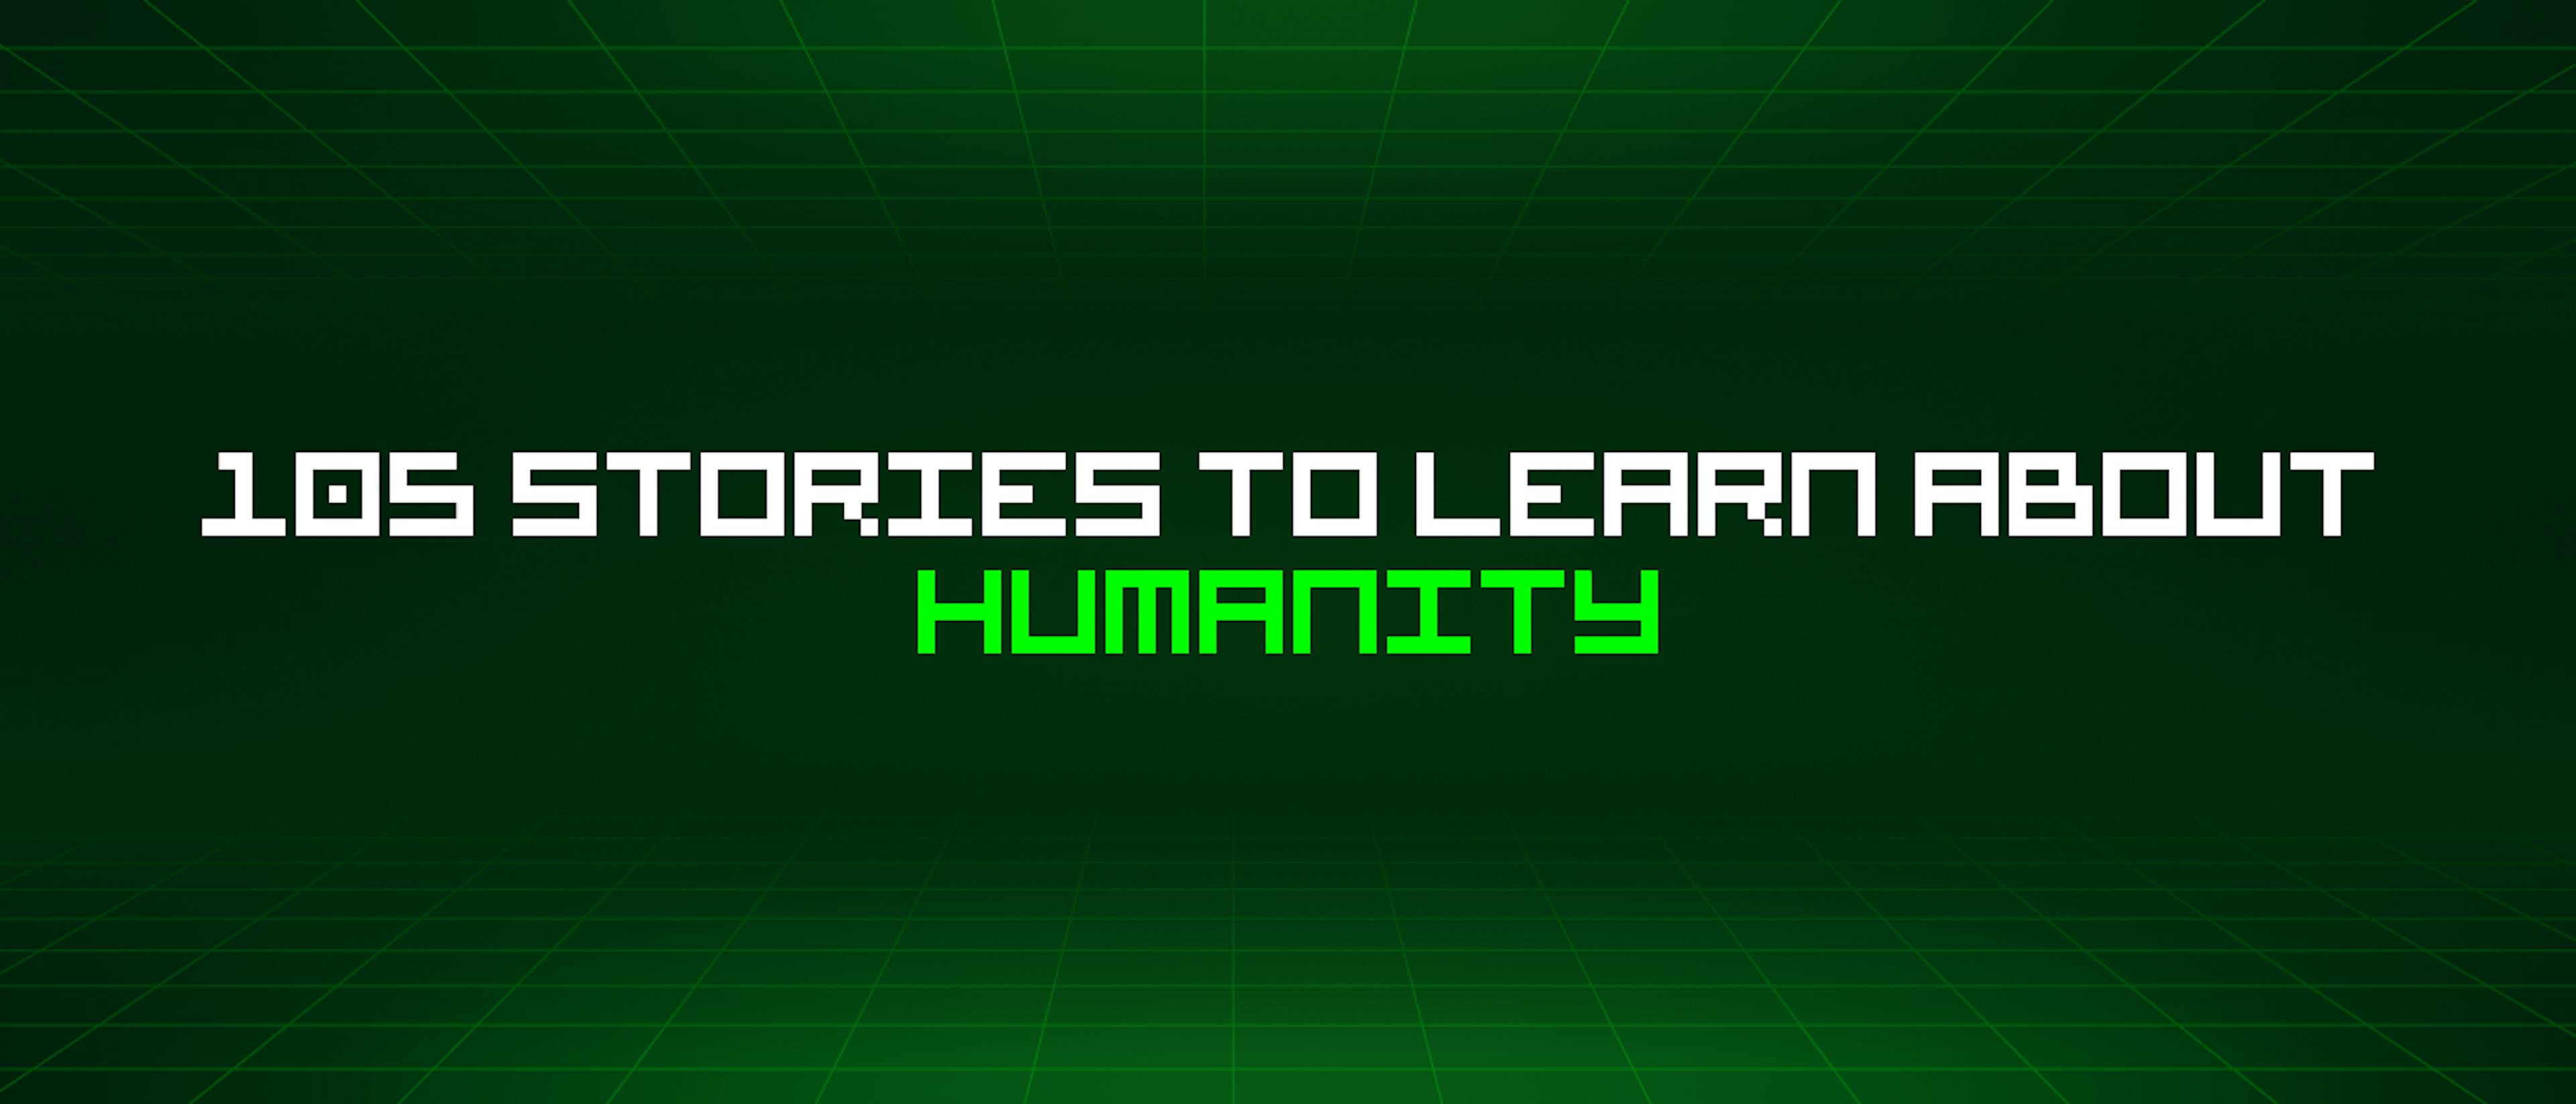 featured image - 105 Stories To Learn About Humanity